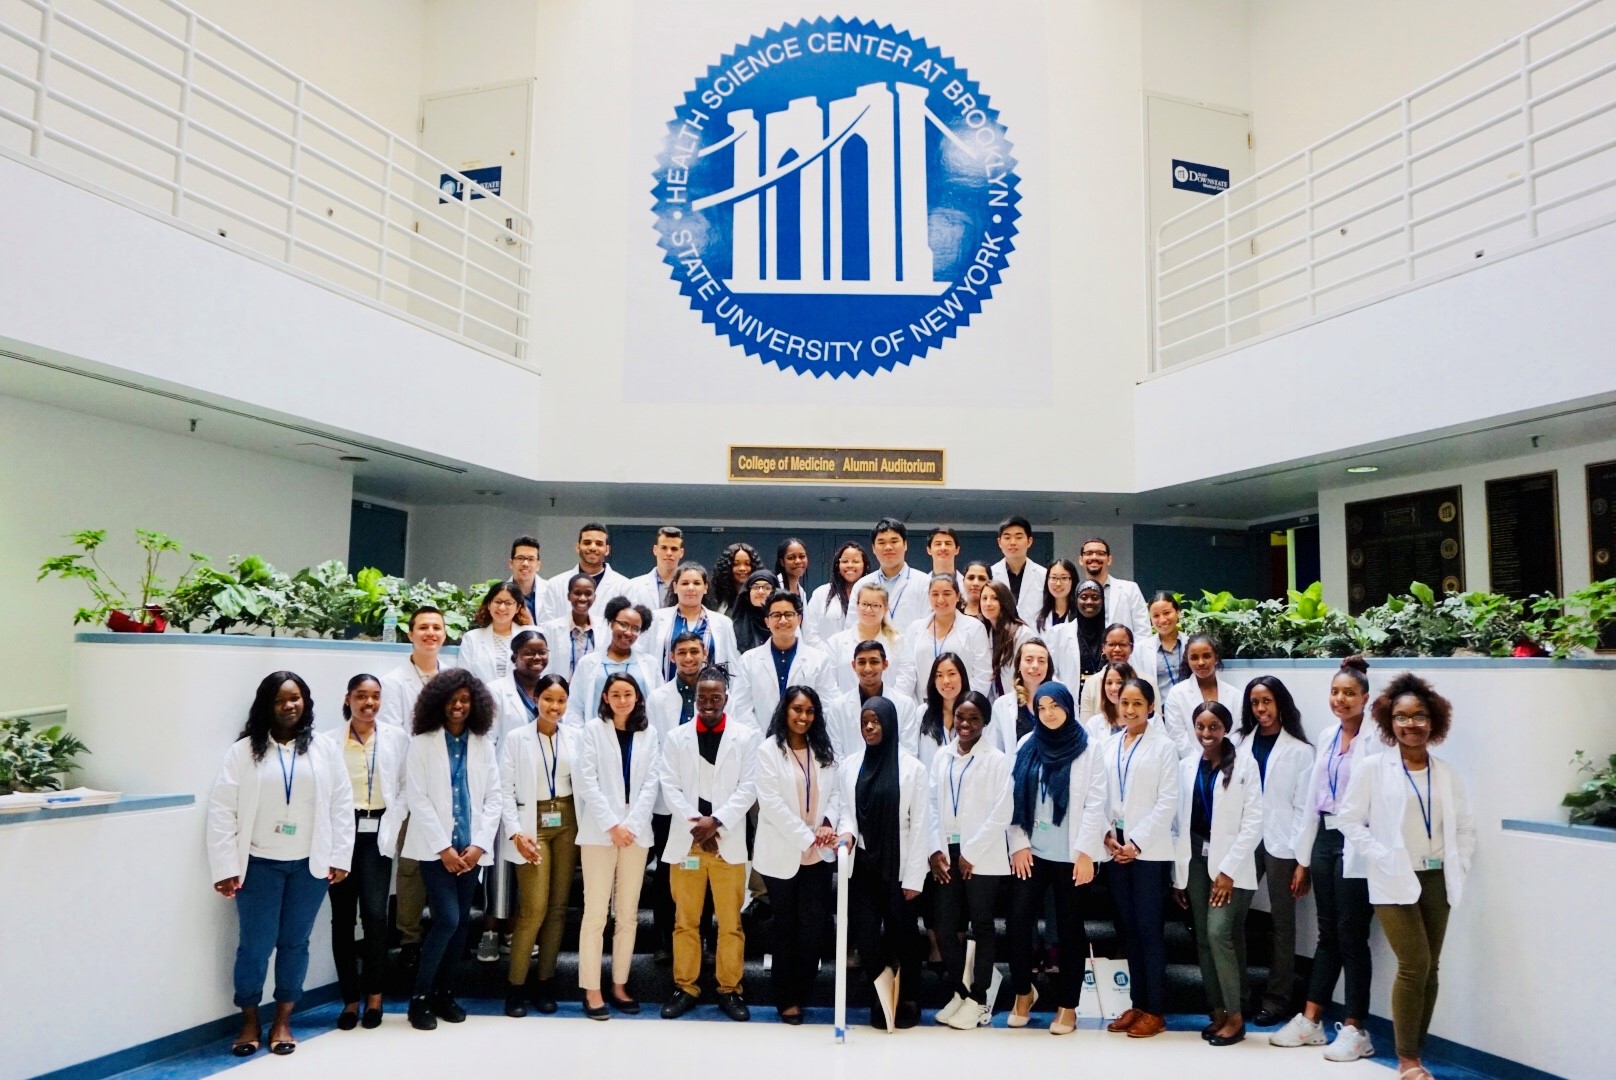 EHC students pose for group photo wearing white coats